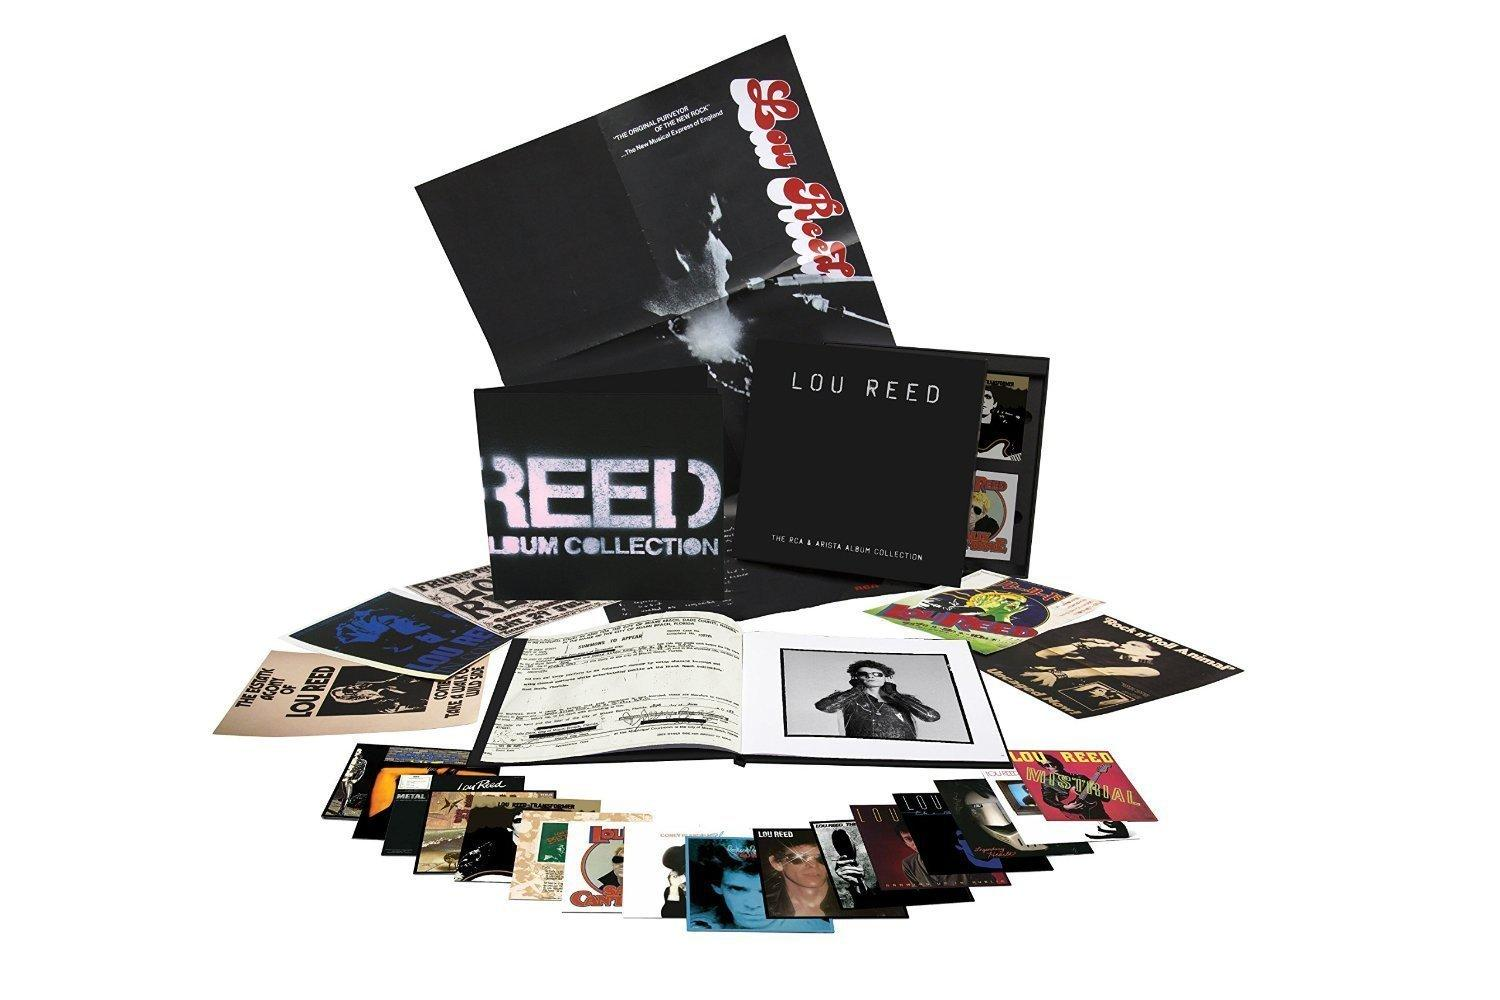 Lou Reed - The RCA (CD) Collection - Albums Arista 